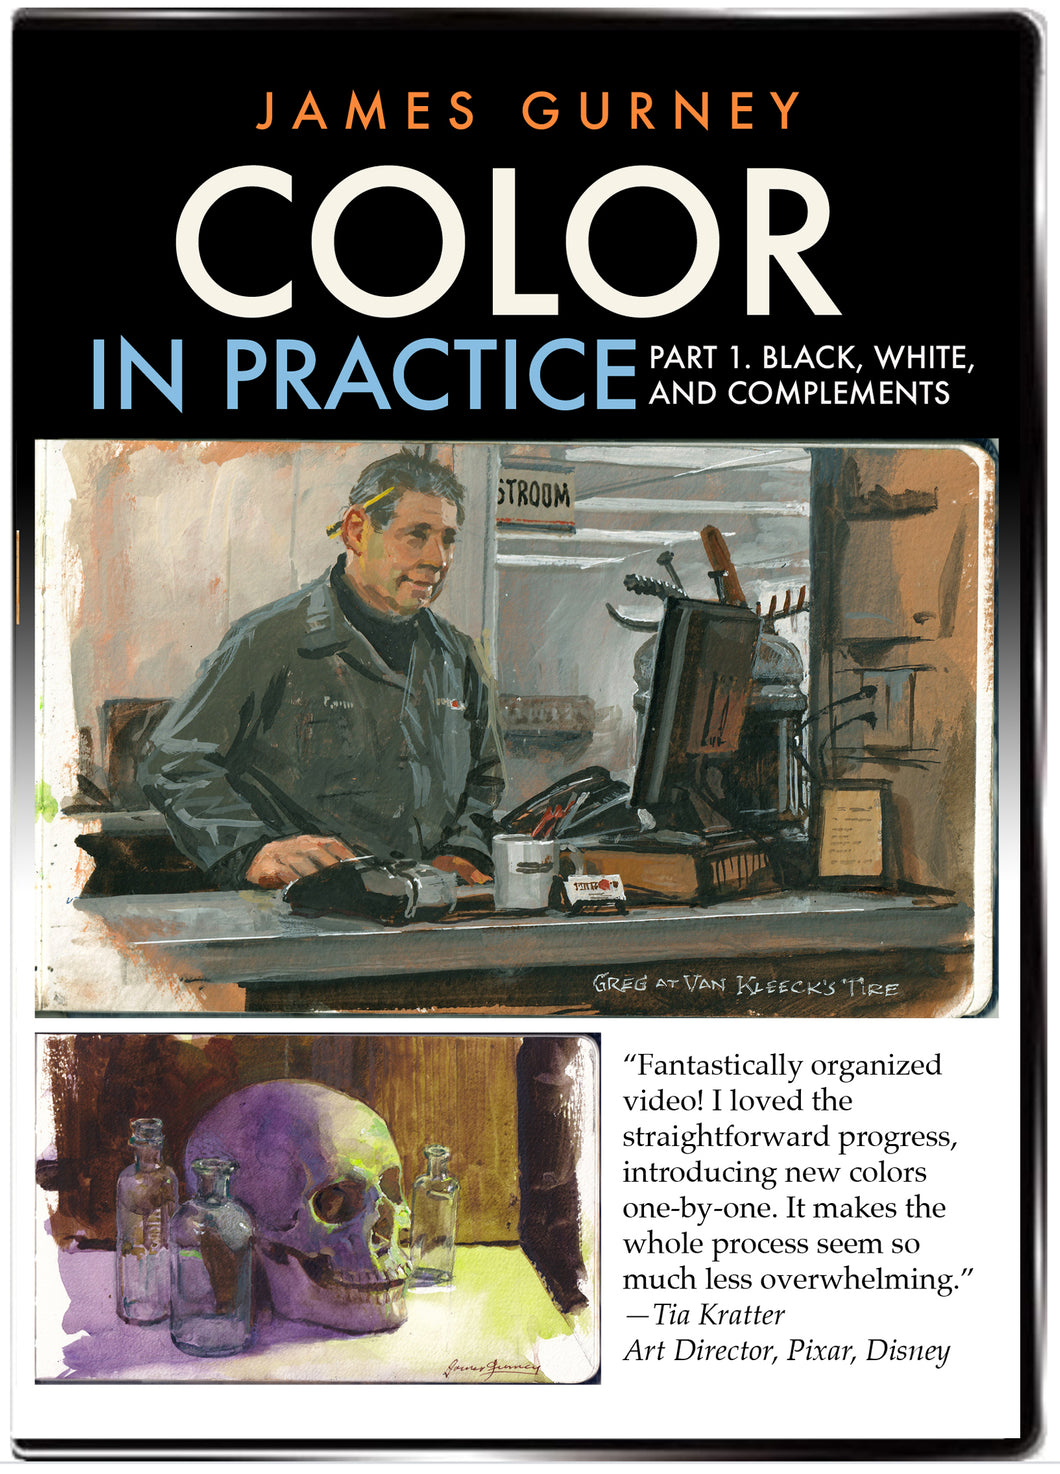 Color in Practice: Part 1. Black, White, and Complements